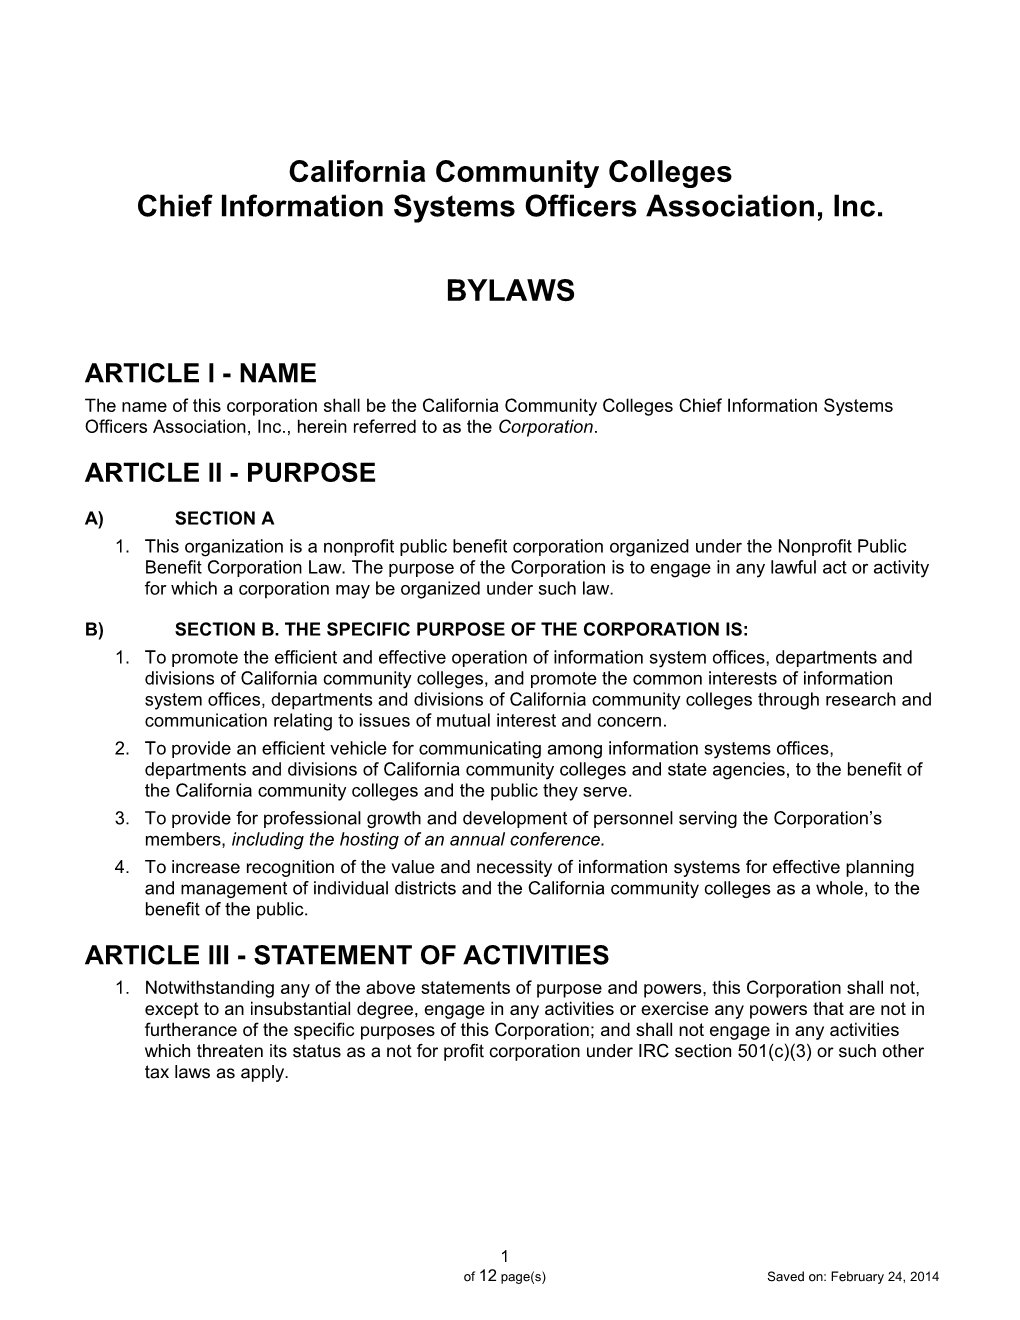 California Community Colleges Chief Information Systems Officers Association, Inc